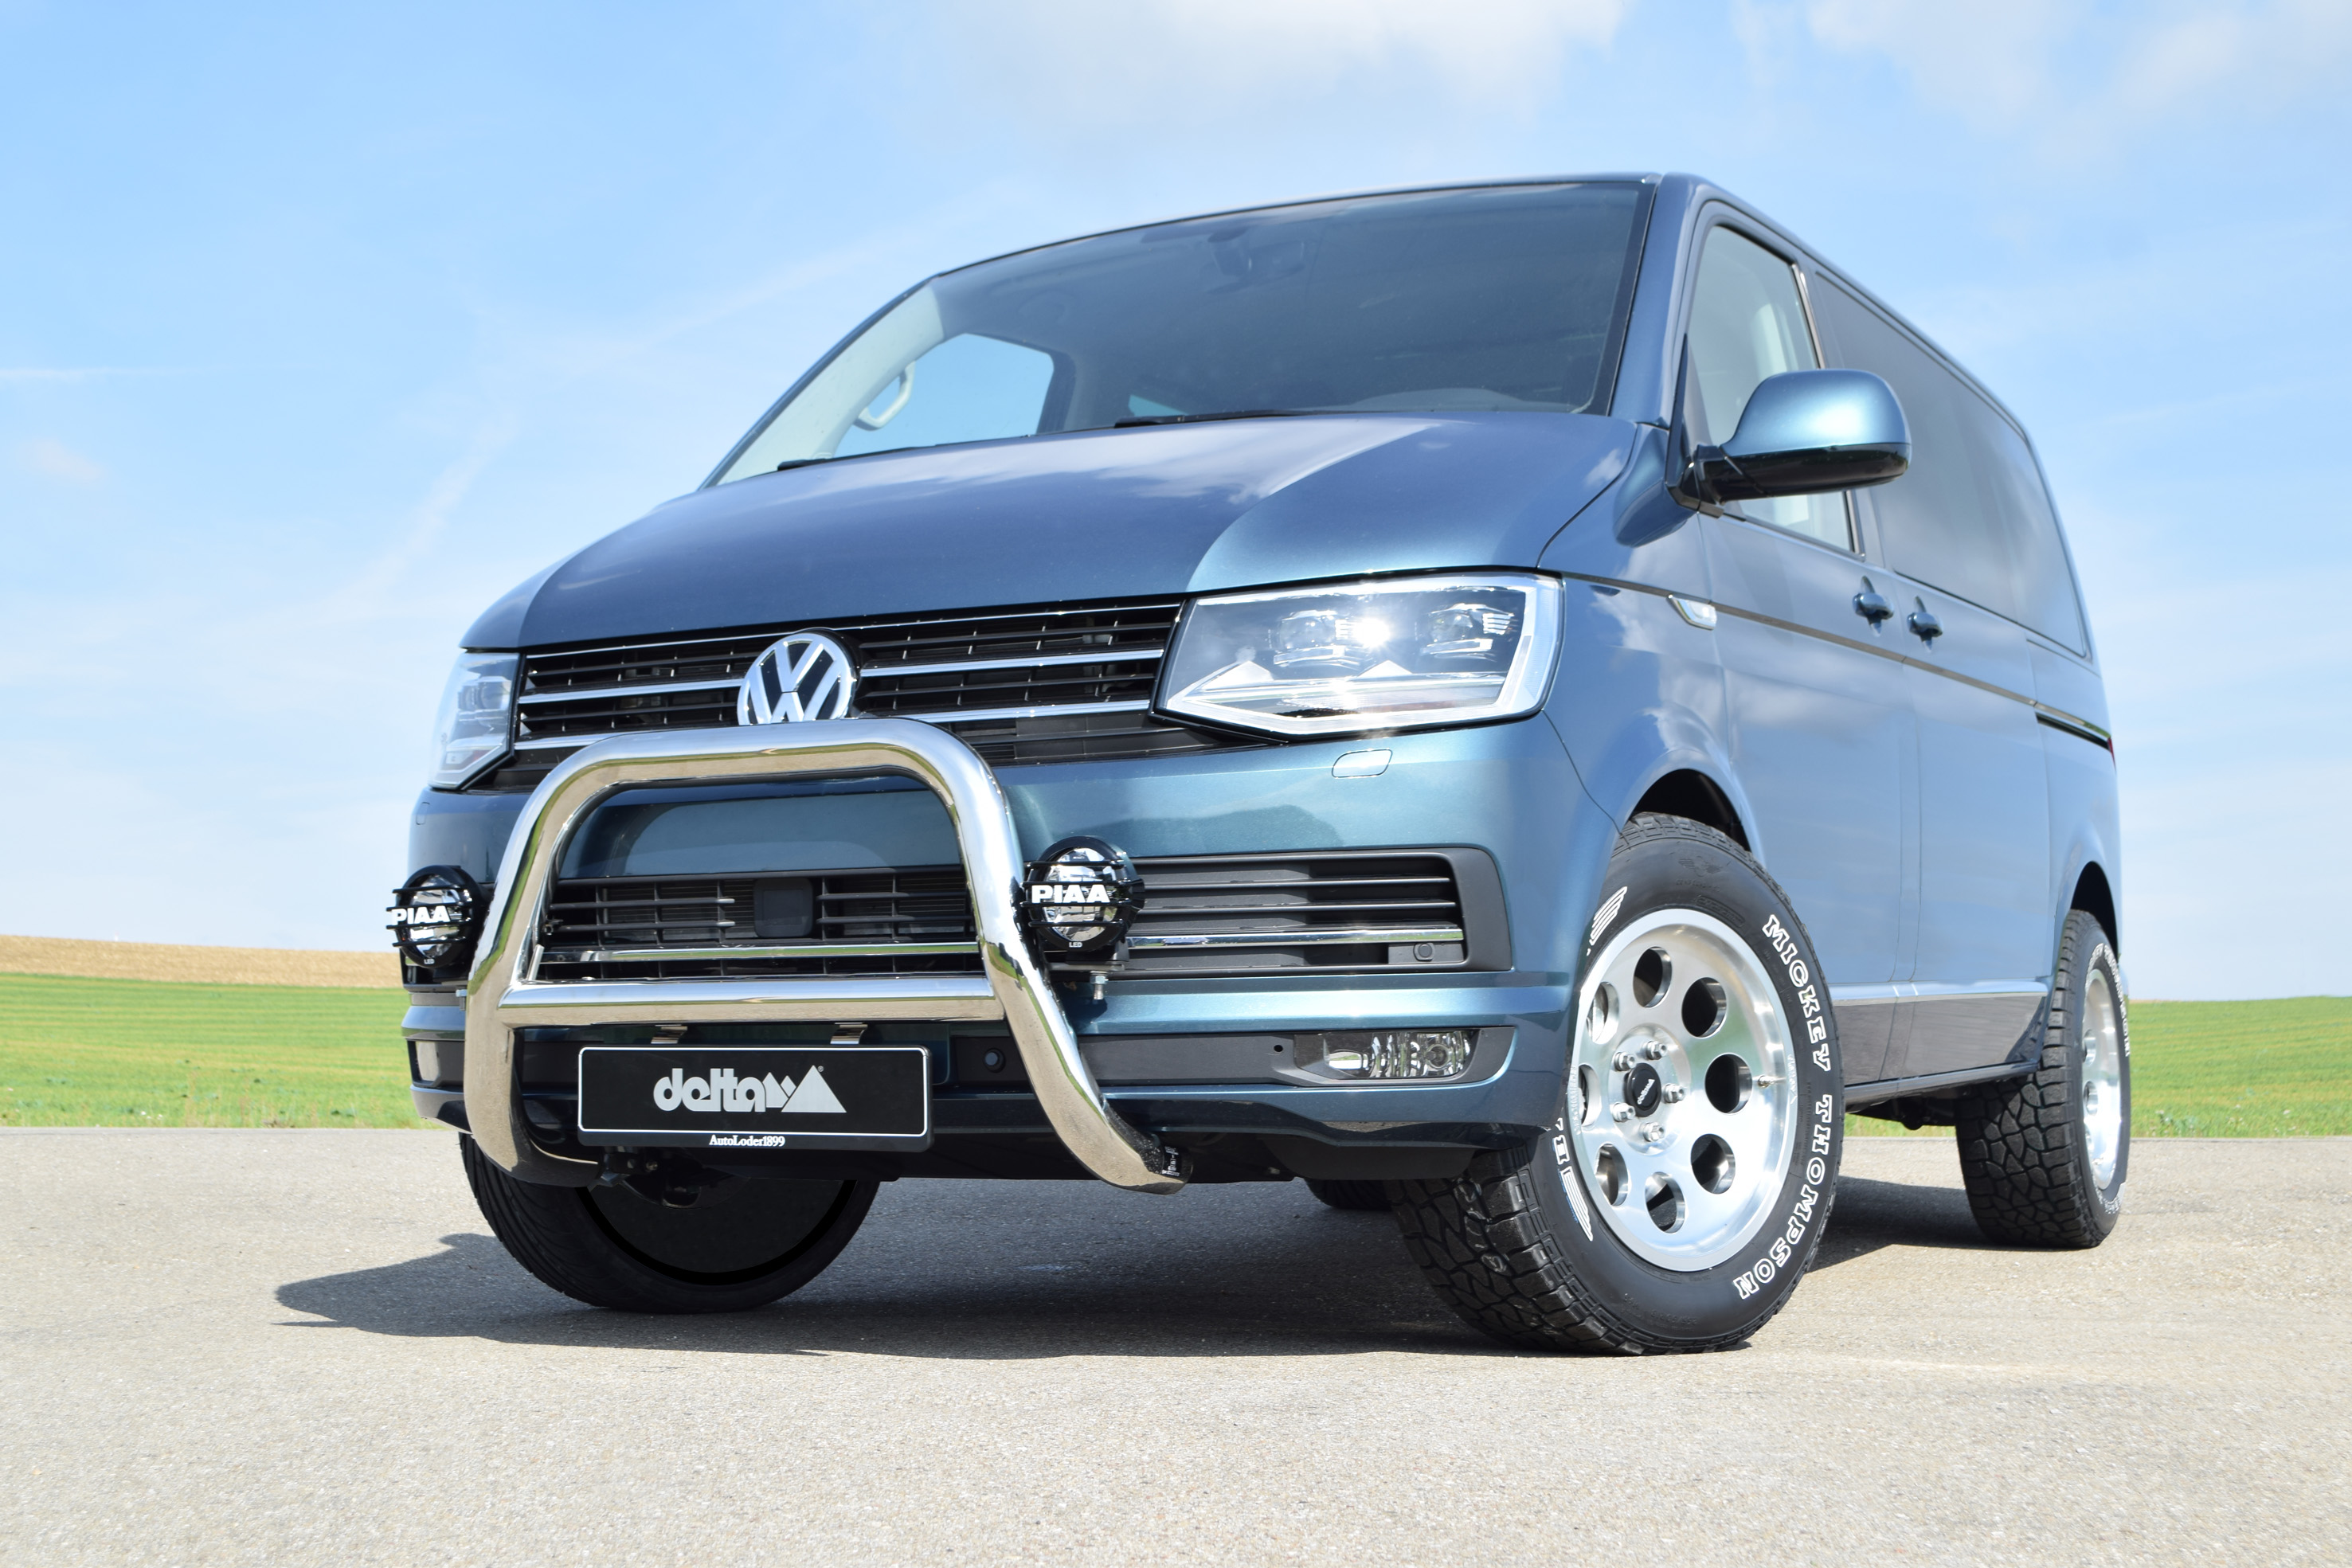 The VW Van Sixth Edition by Delta4x4